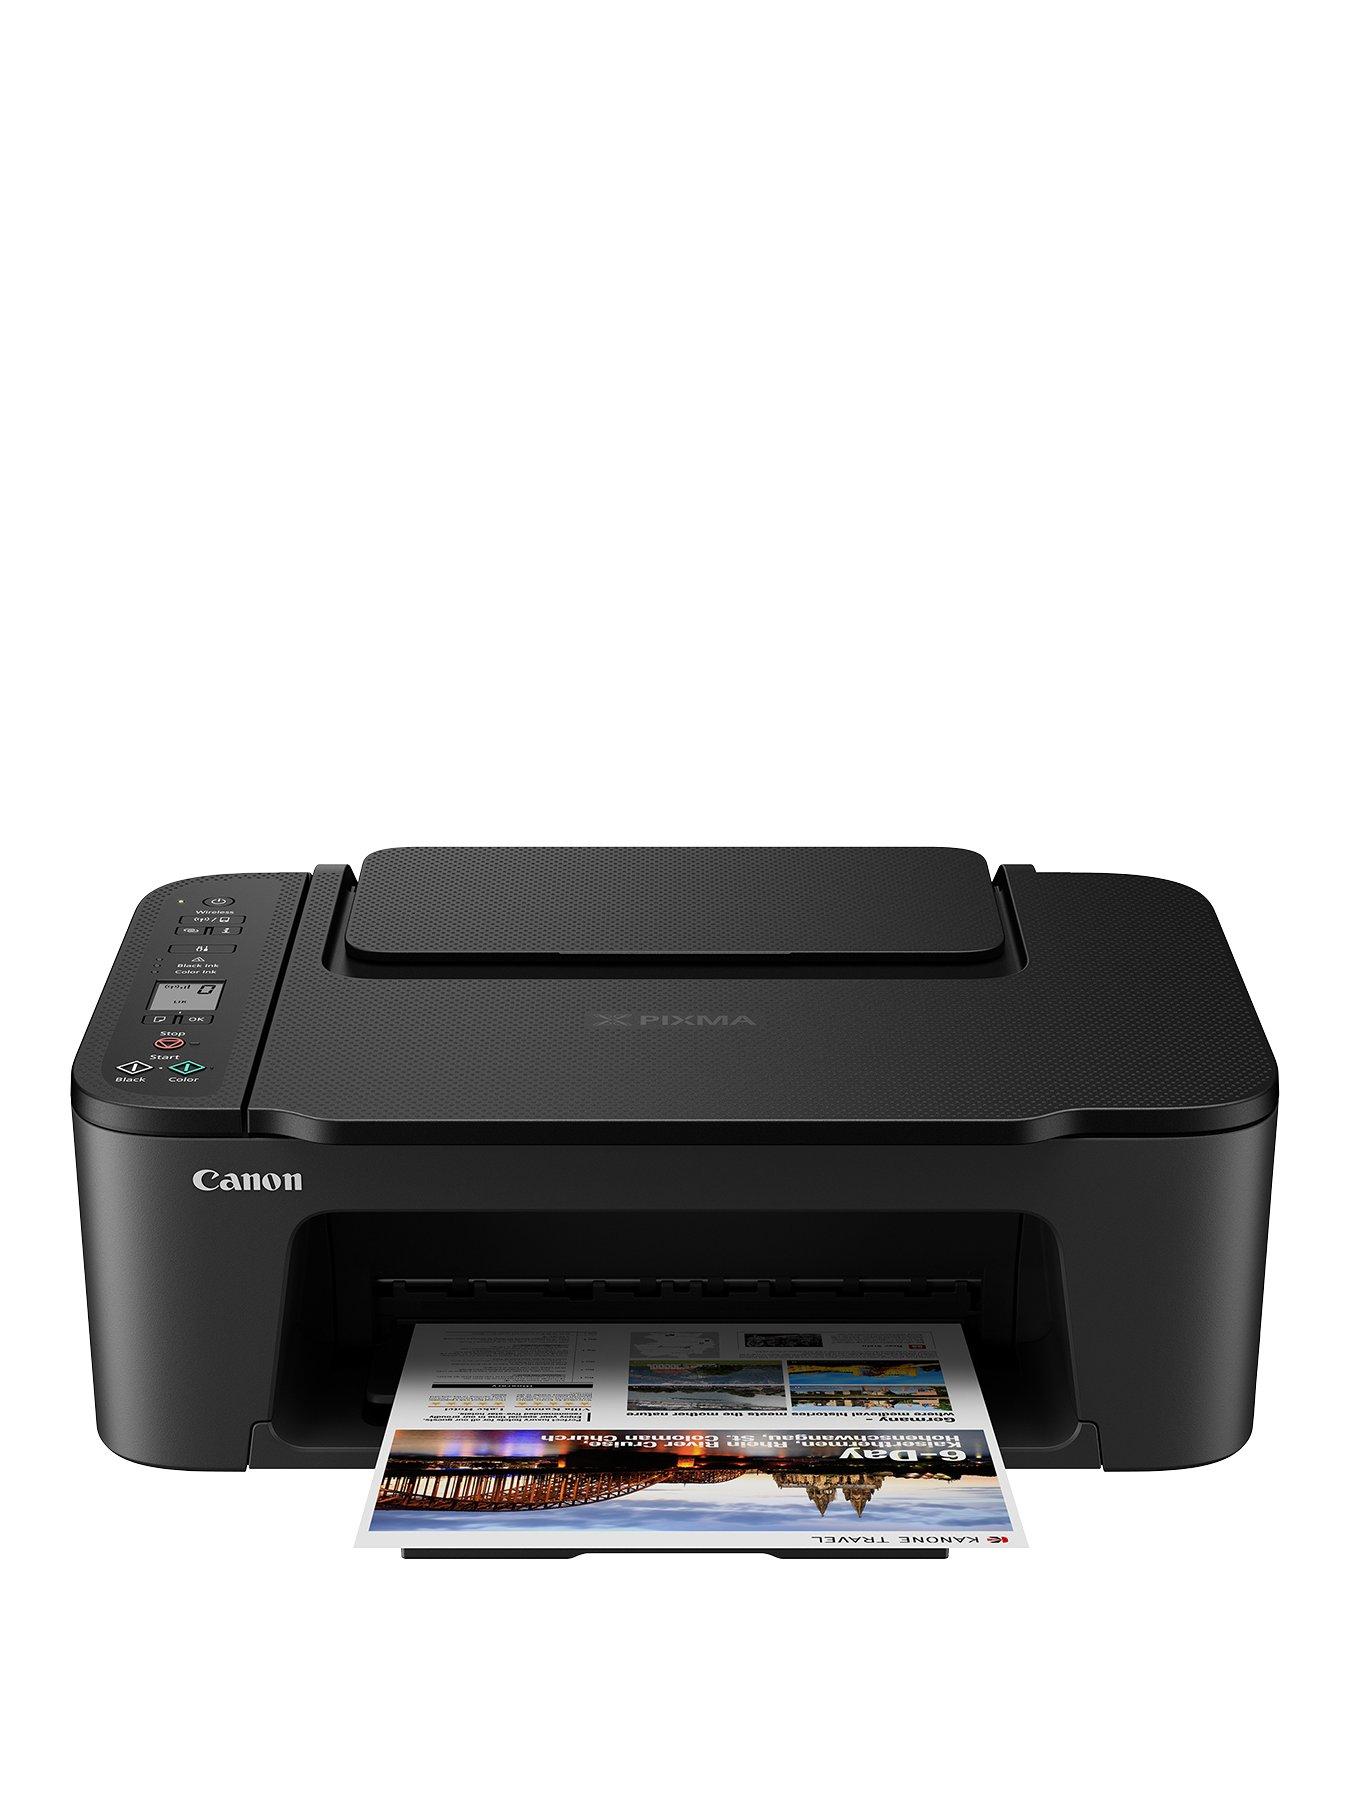 How To Setup/Connect Canon Pixma TS3450 Wireless Printer To WIFI Network 